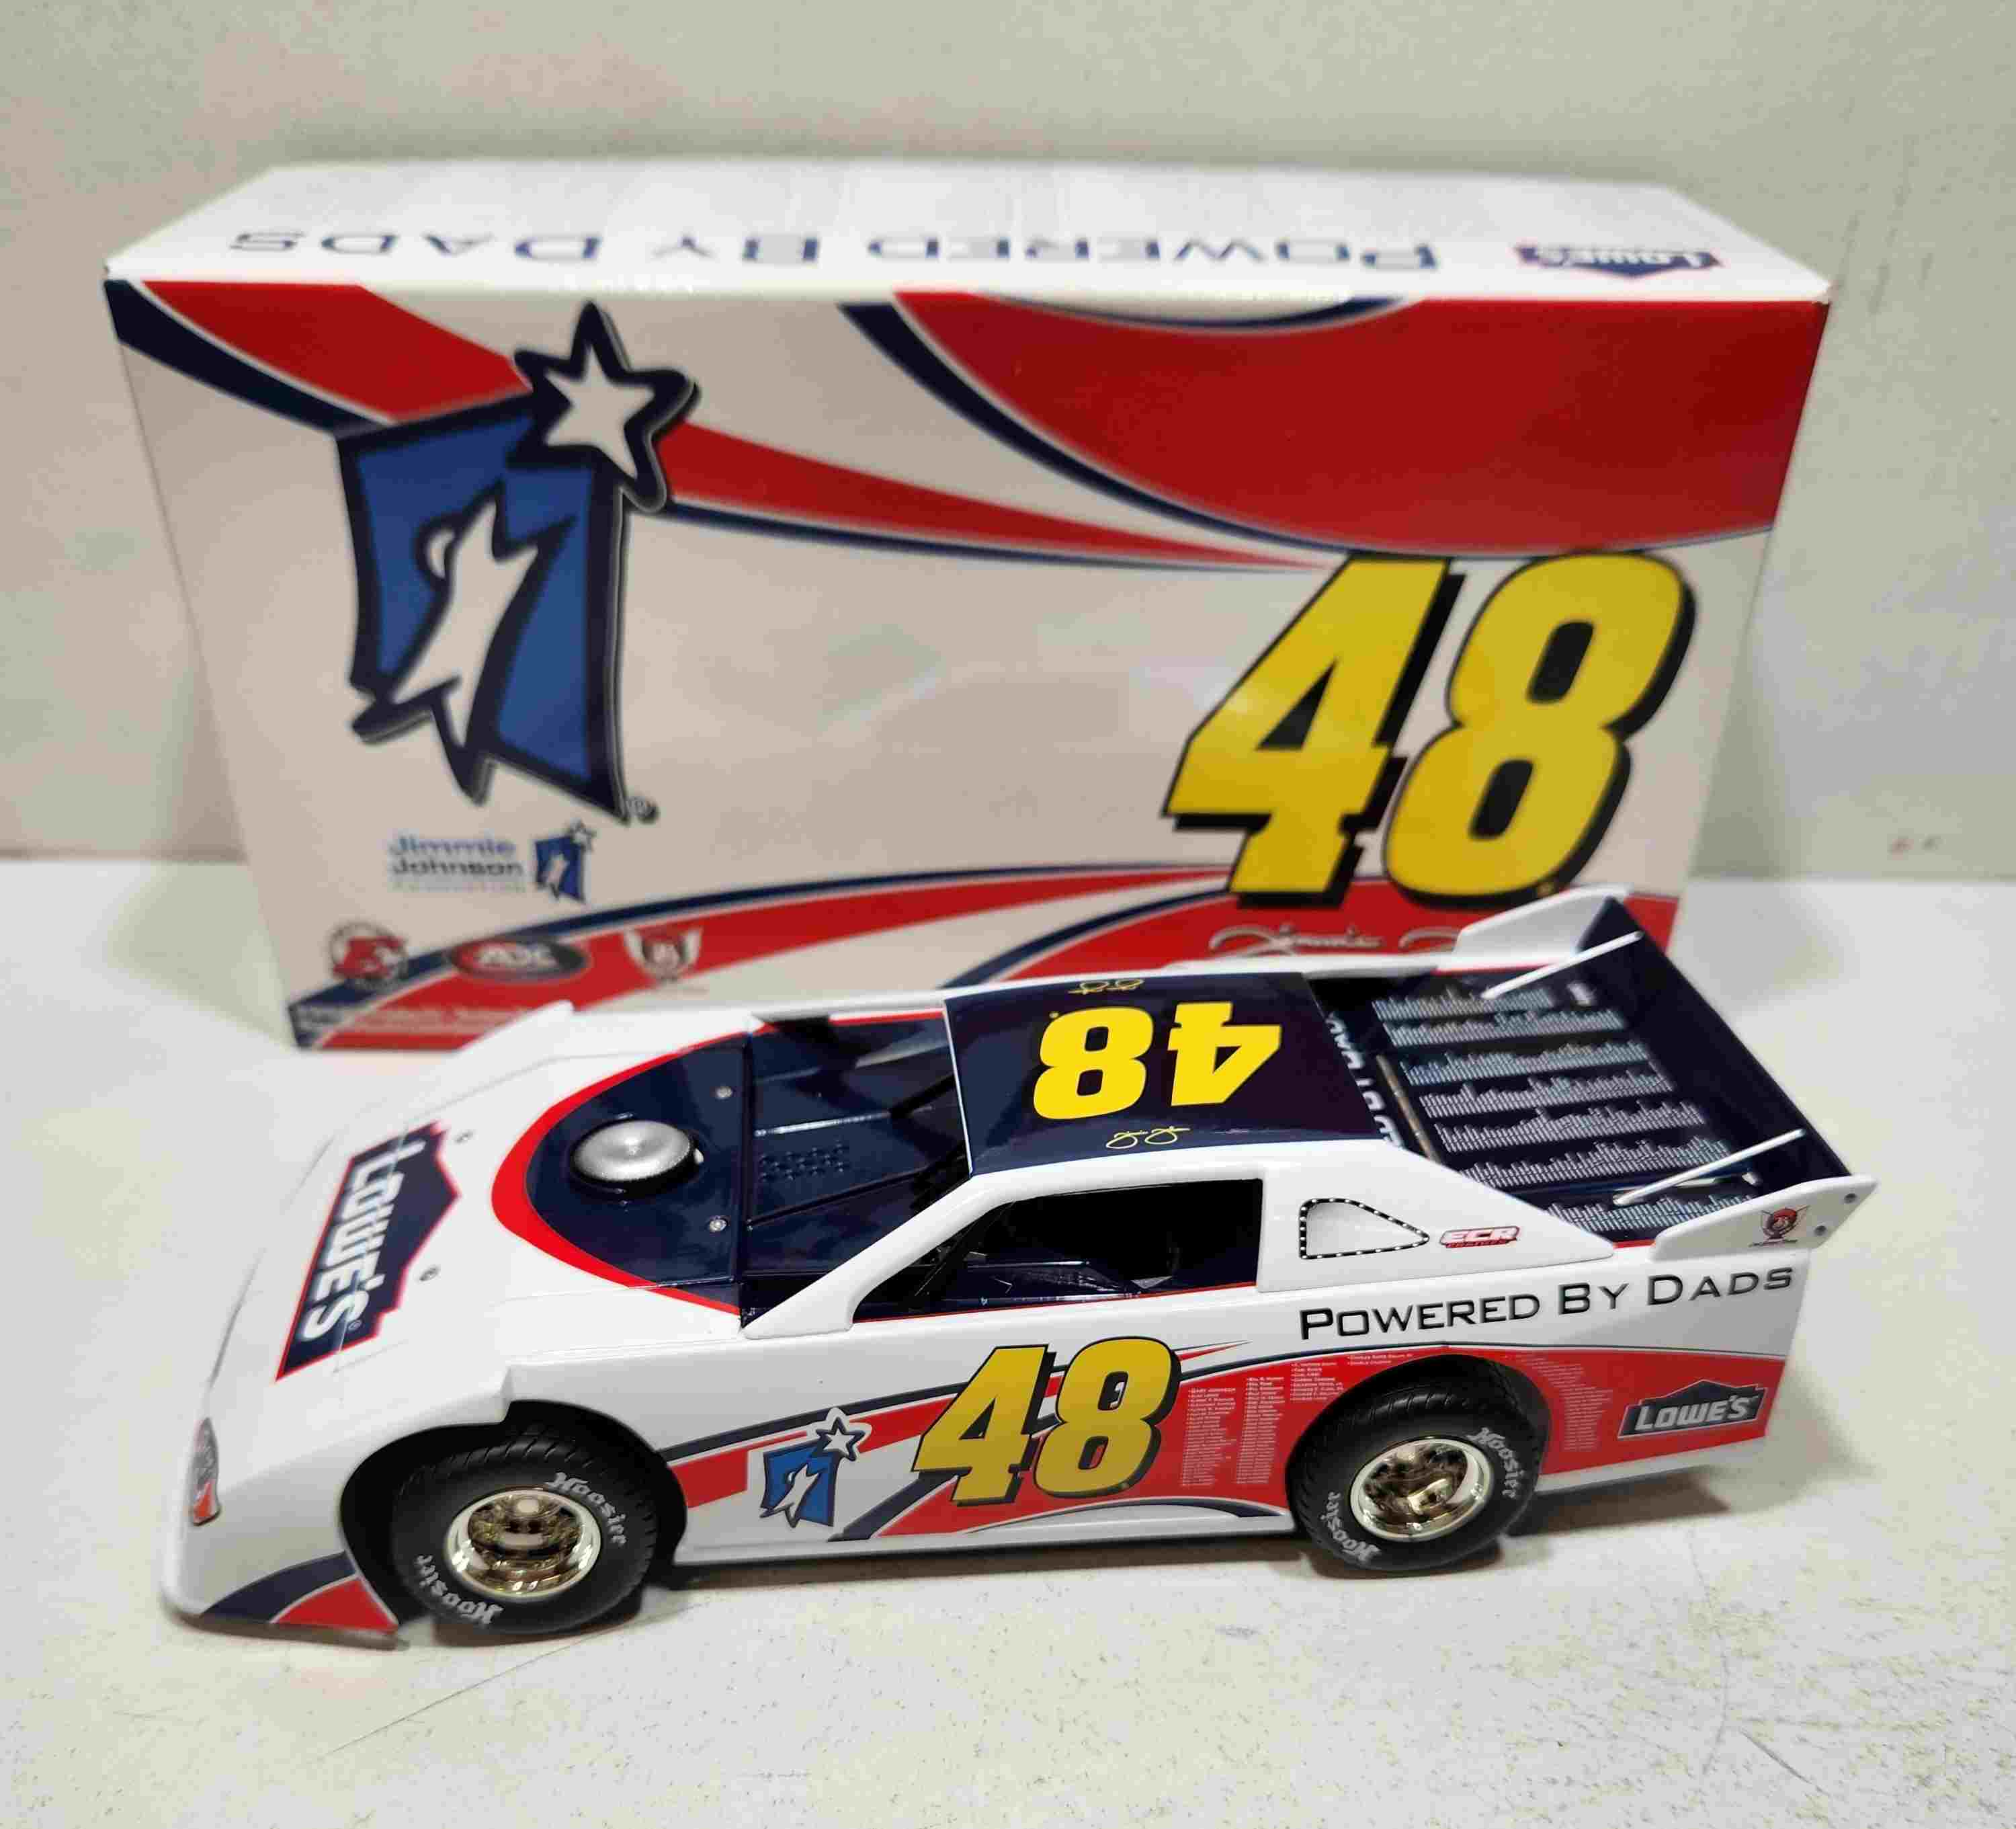 2010 Jimmie Johnson 1/24th Lowe's Dirt car by ADC